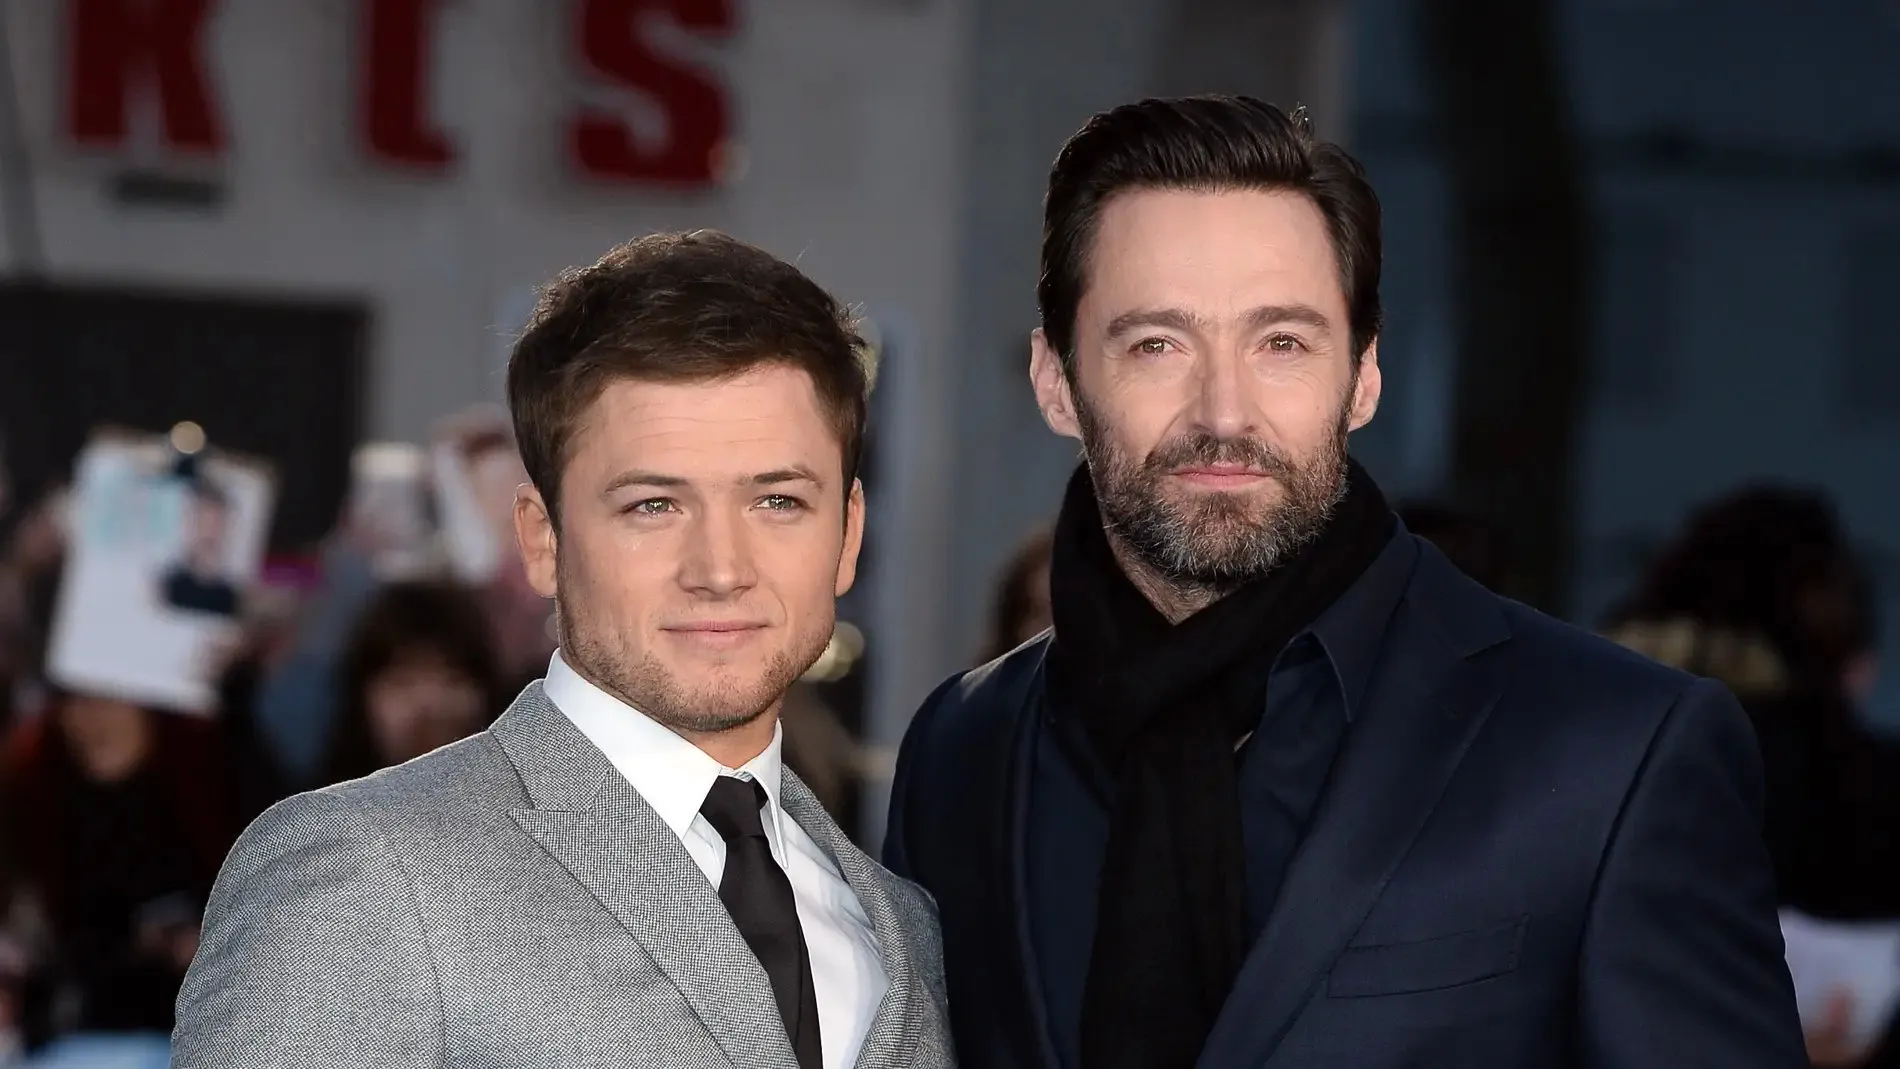 Taron Egerton has discussed with Marvel to play Wolverine | FMV6